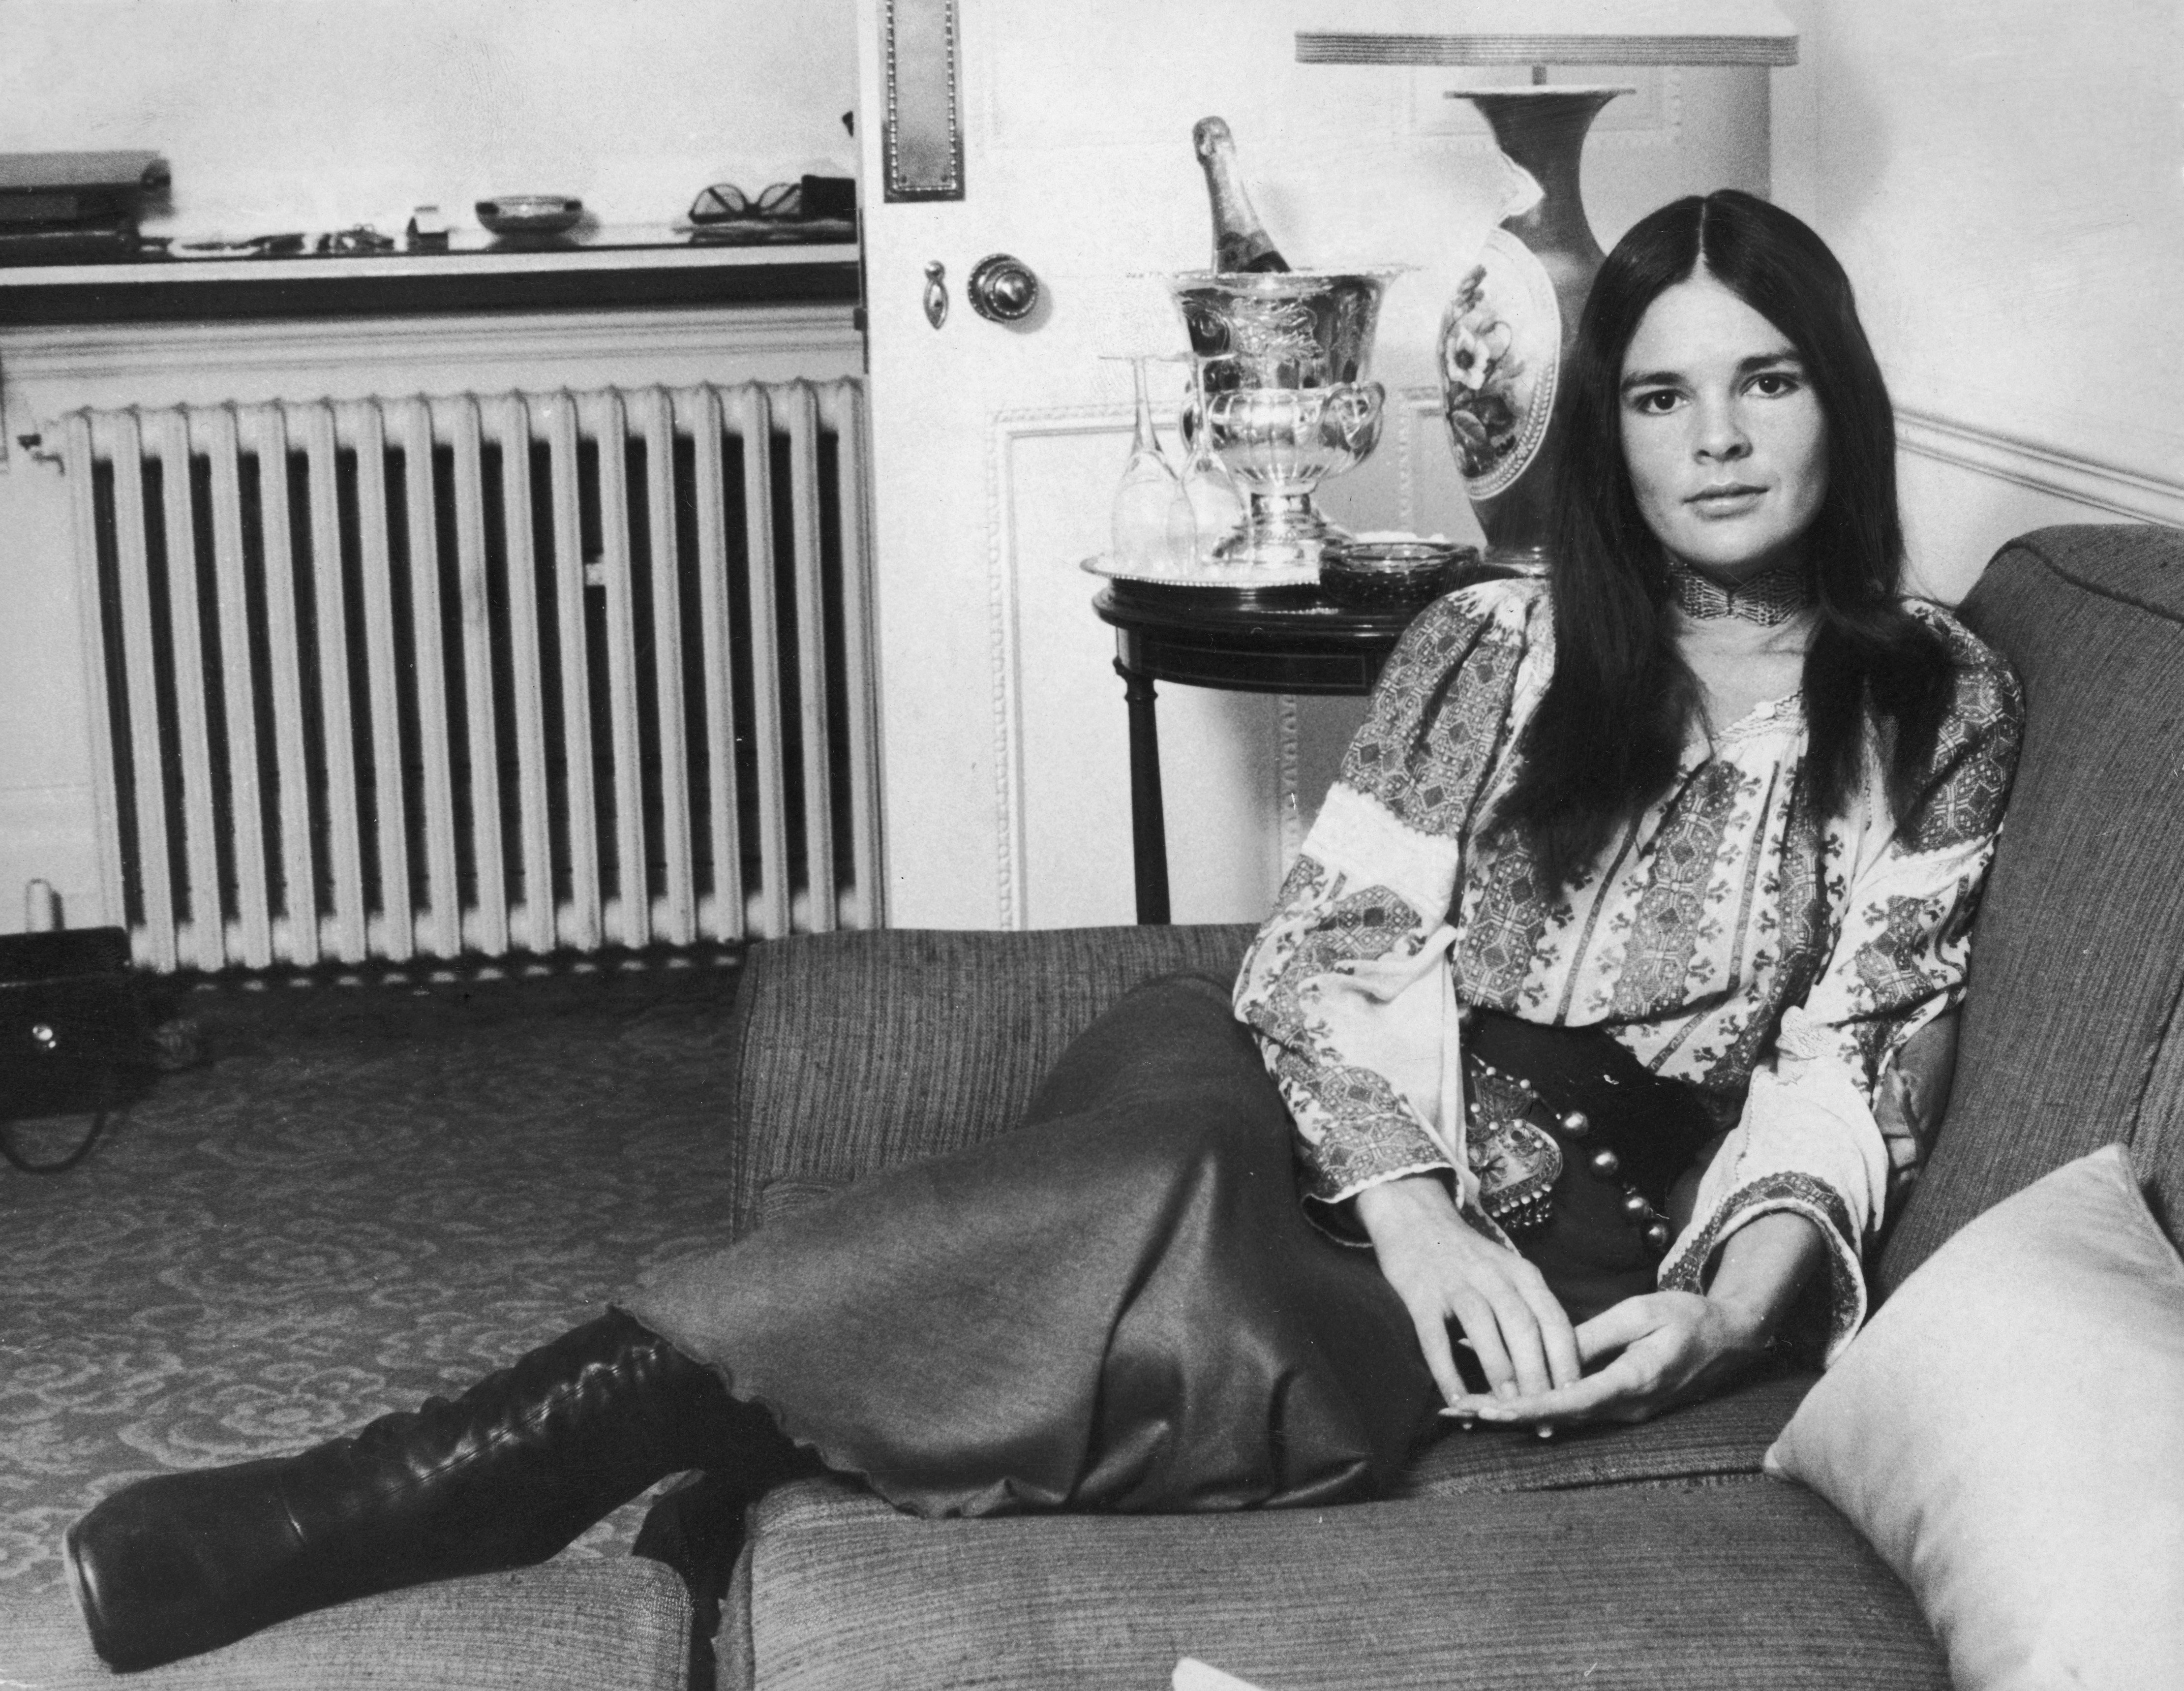 Style icon and former model Ali MacGraw seated on the couch wearing leather boots paired with a long skirt and a floral blouse on March 8, 1971. | Source: Getty Images